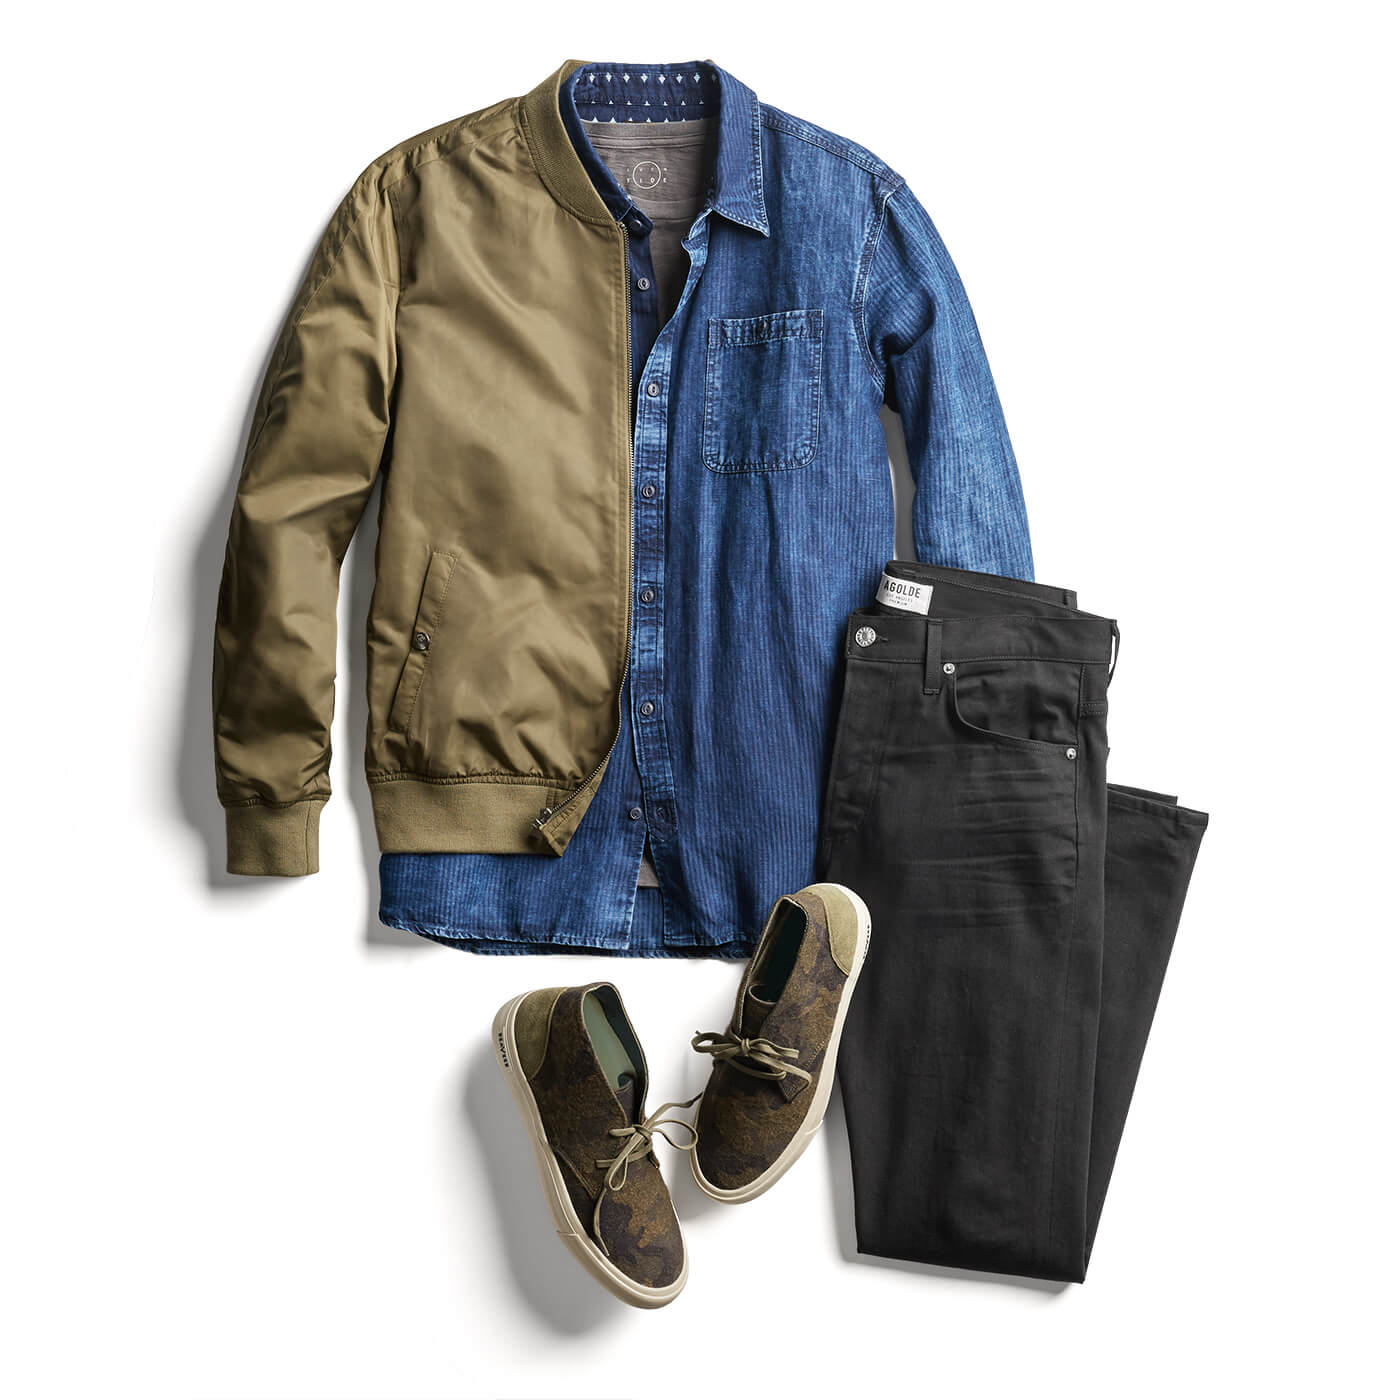 How to Style a Denim Shirt